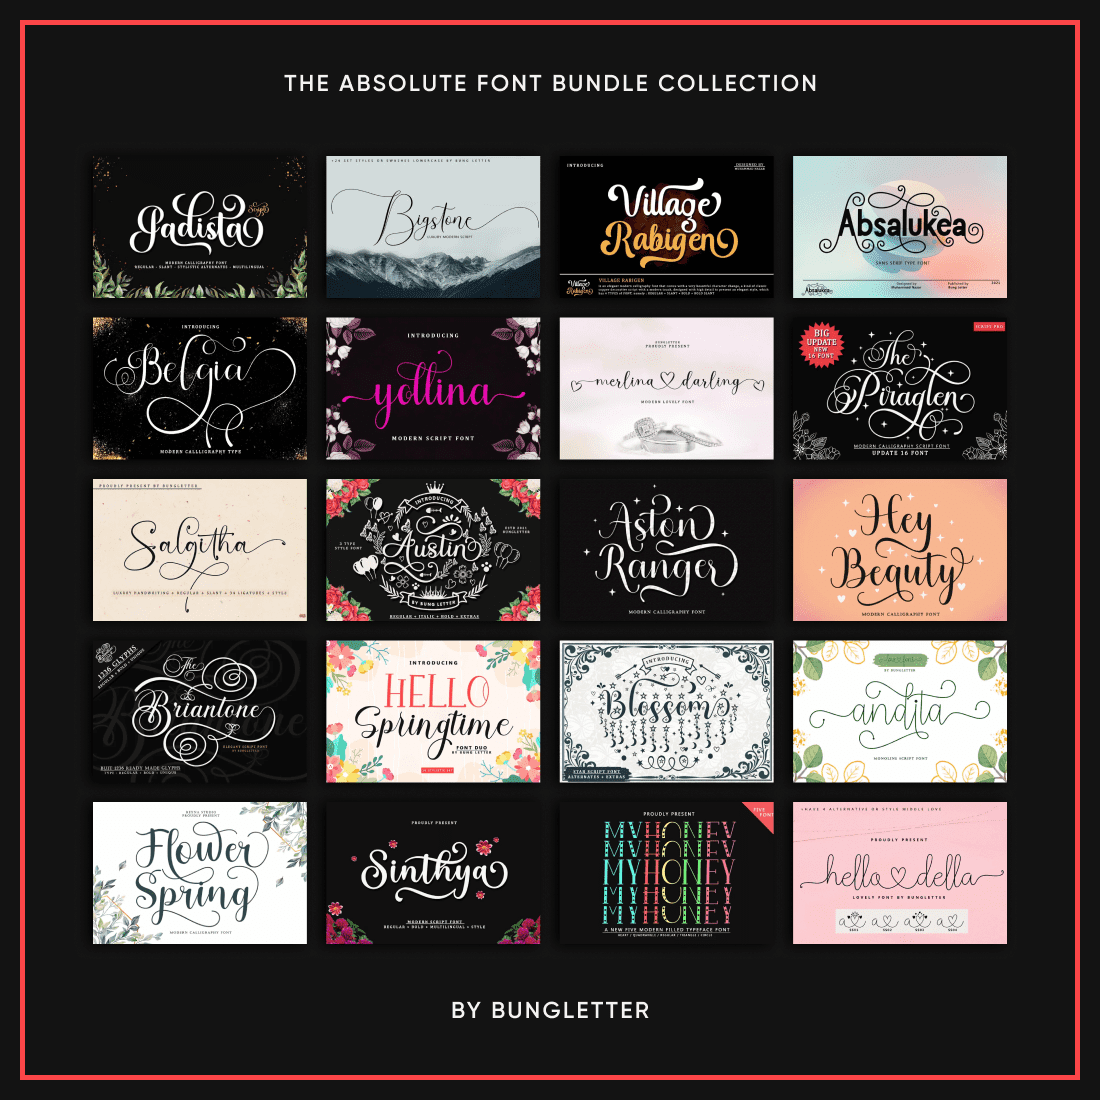 The Absolute Font Bundle Collection cover.